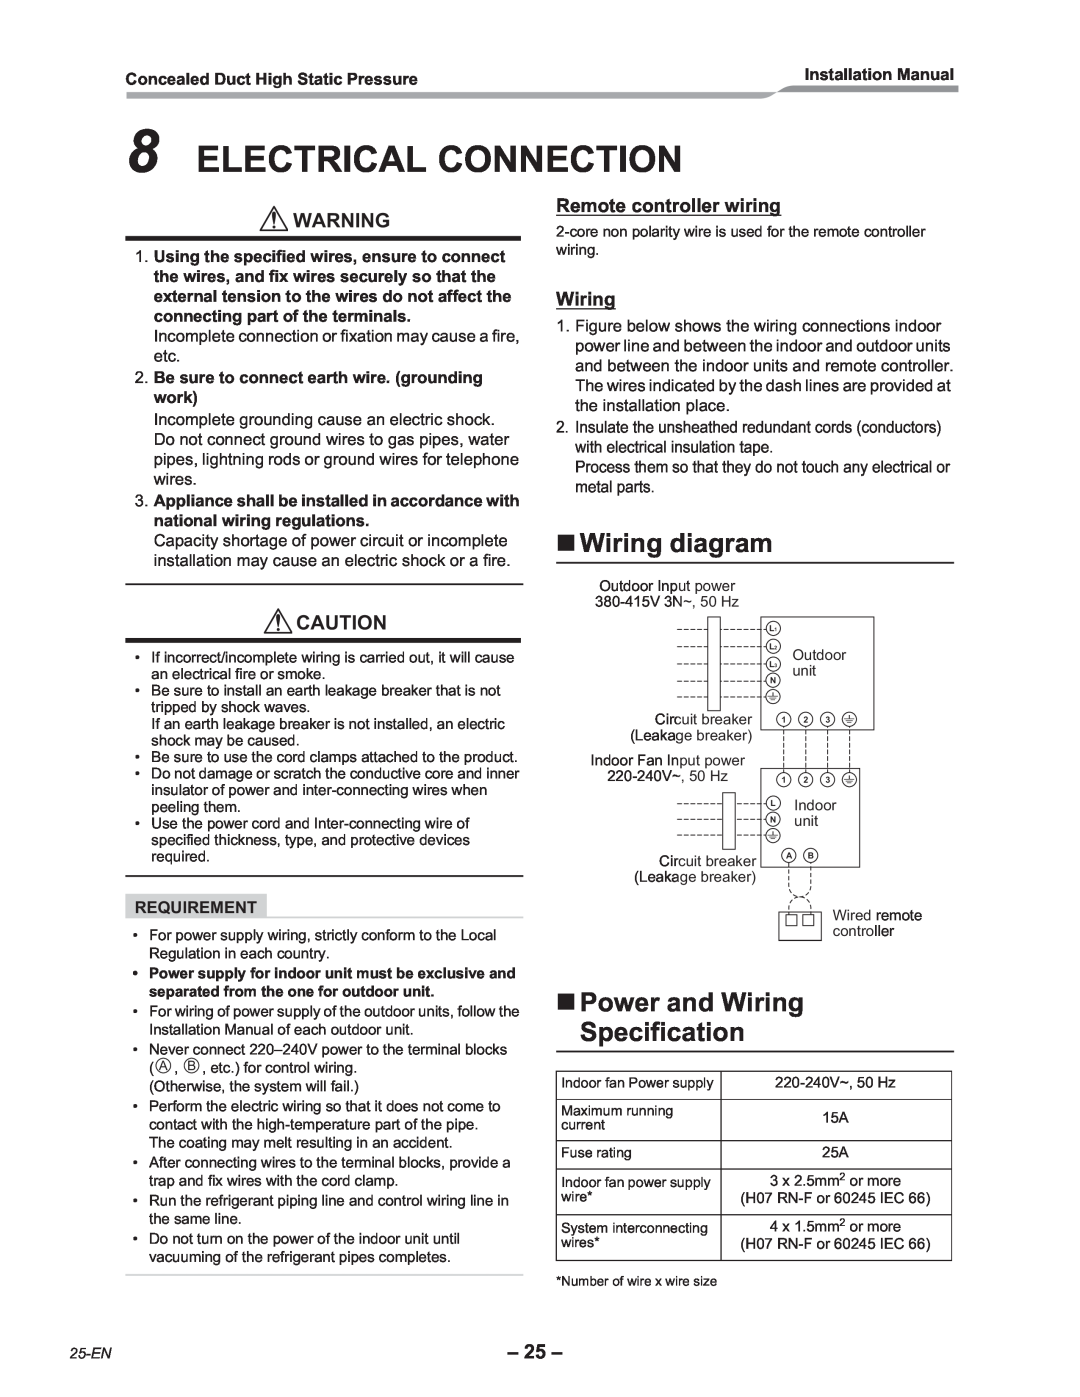 Toshiba RAV-SM2802DT-E Electrical Connection, Wiring diagram, Power and Wiring Specification, Remote controller wiring 